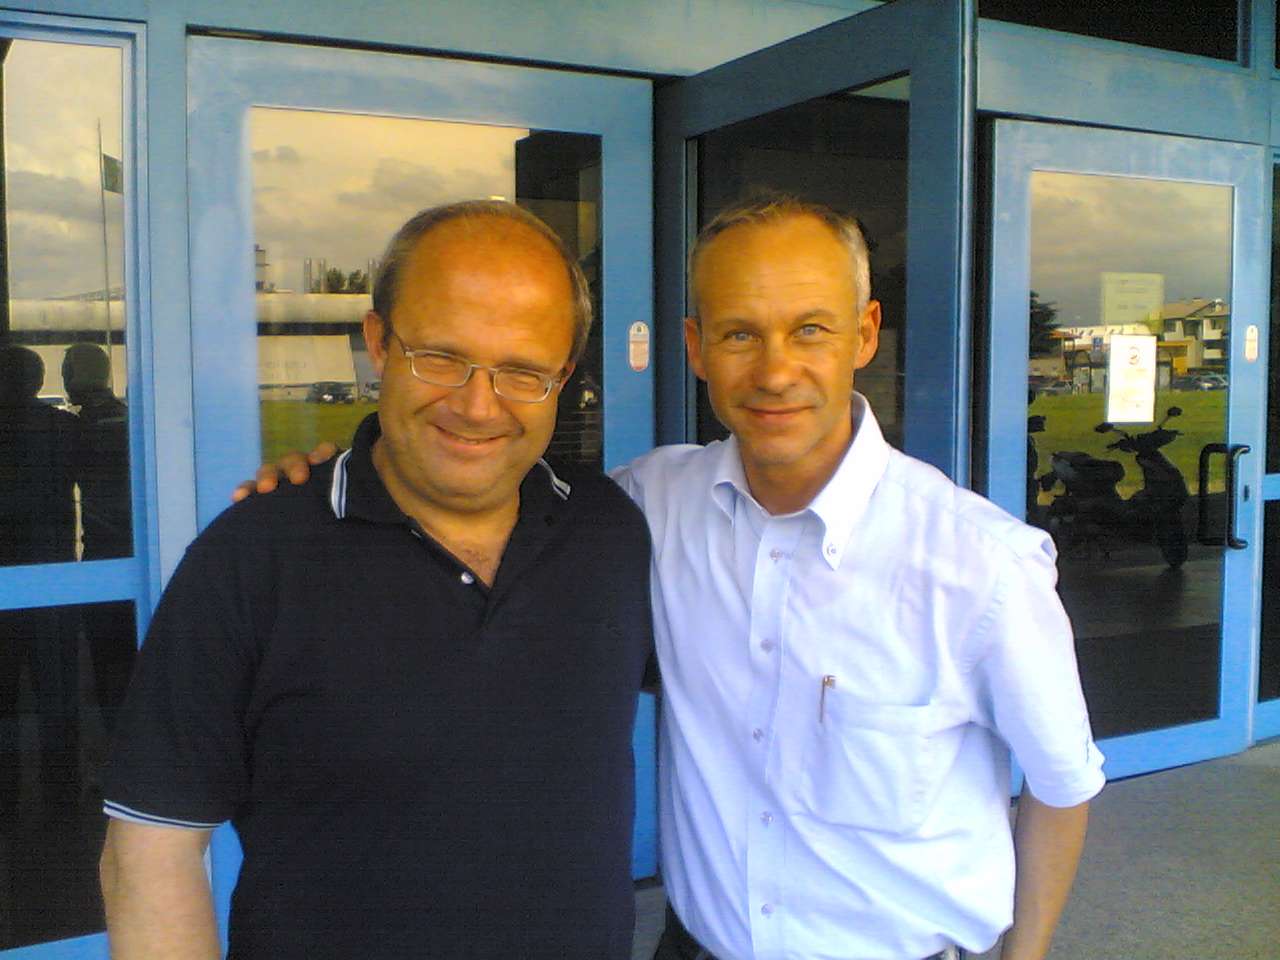 Massimo Persic (left) with Stefano Codutti (right): 94 KB; click on the image to enlarge